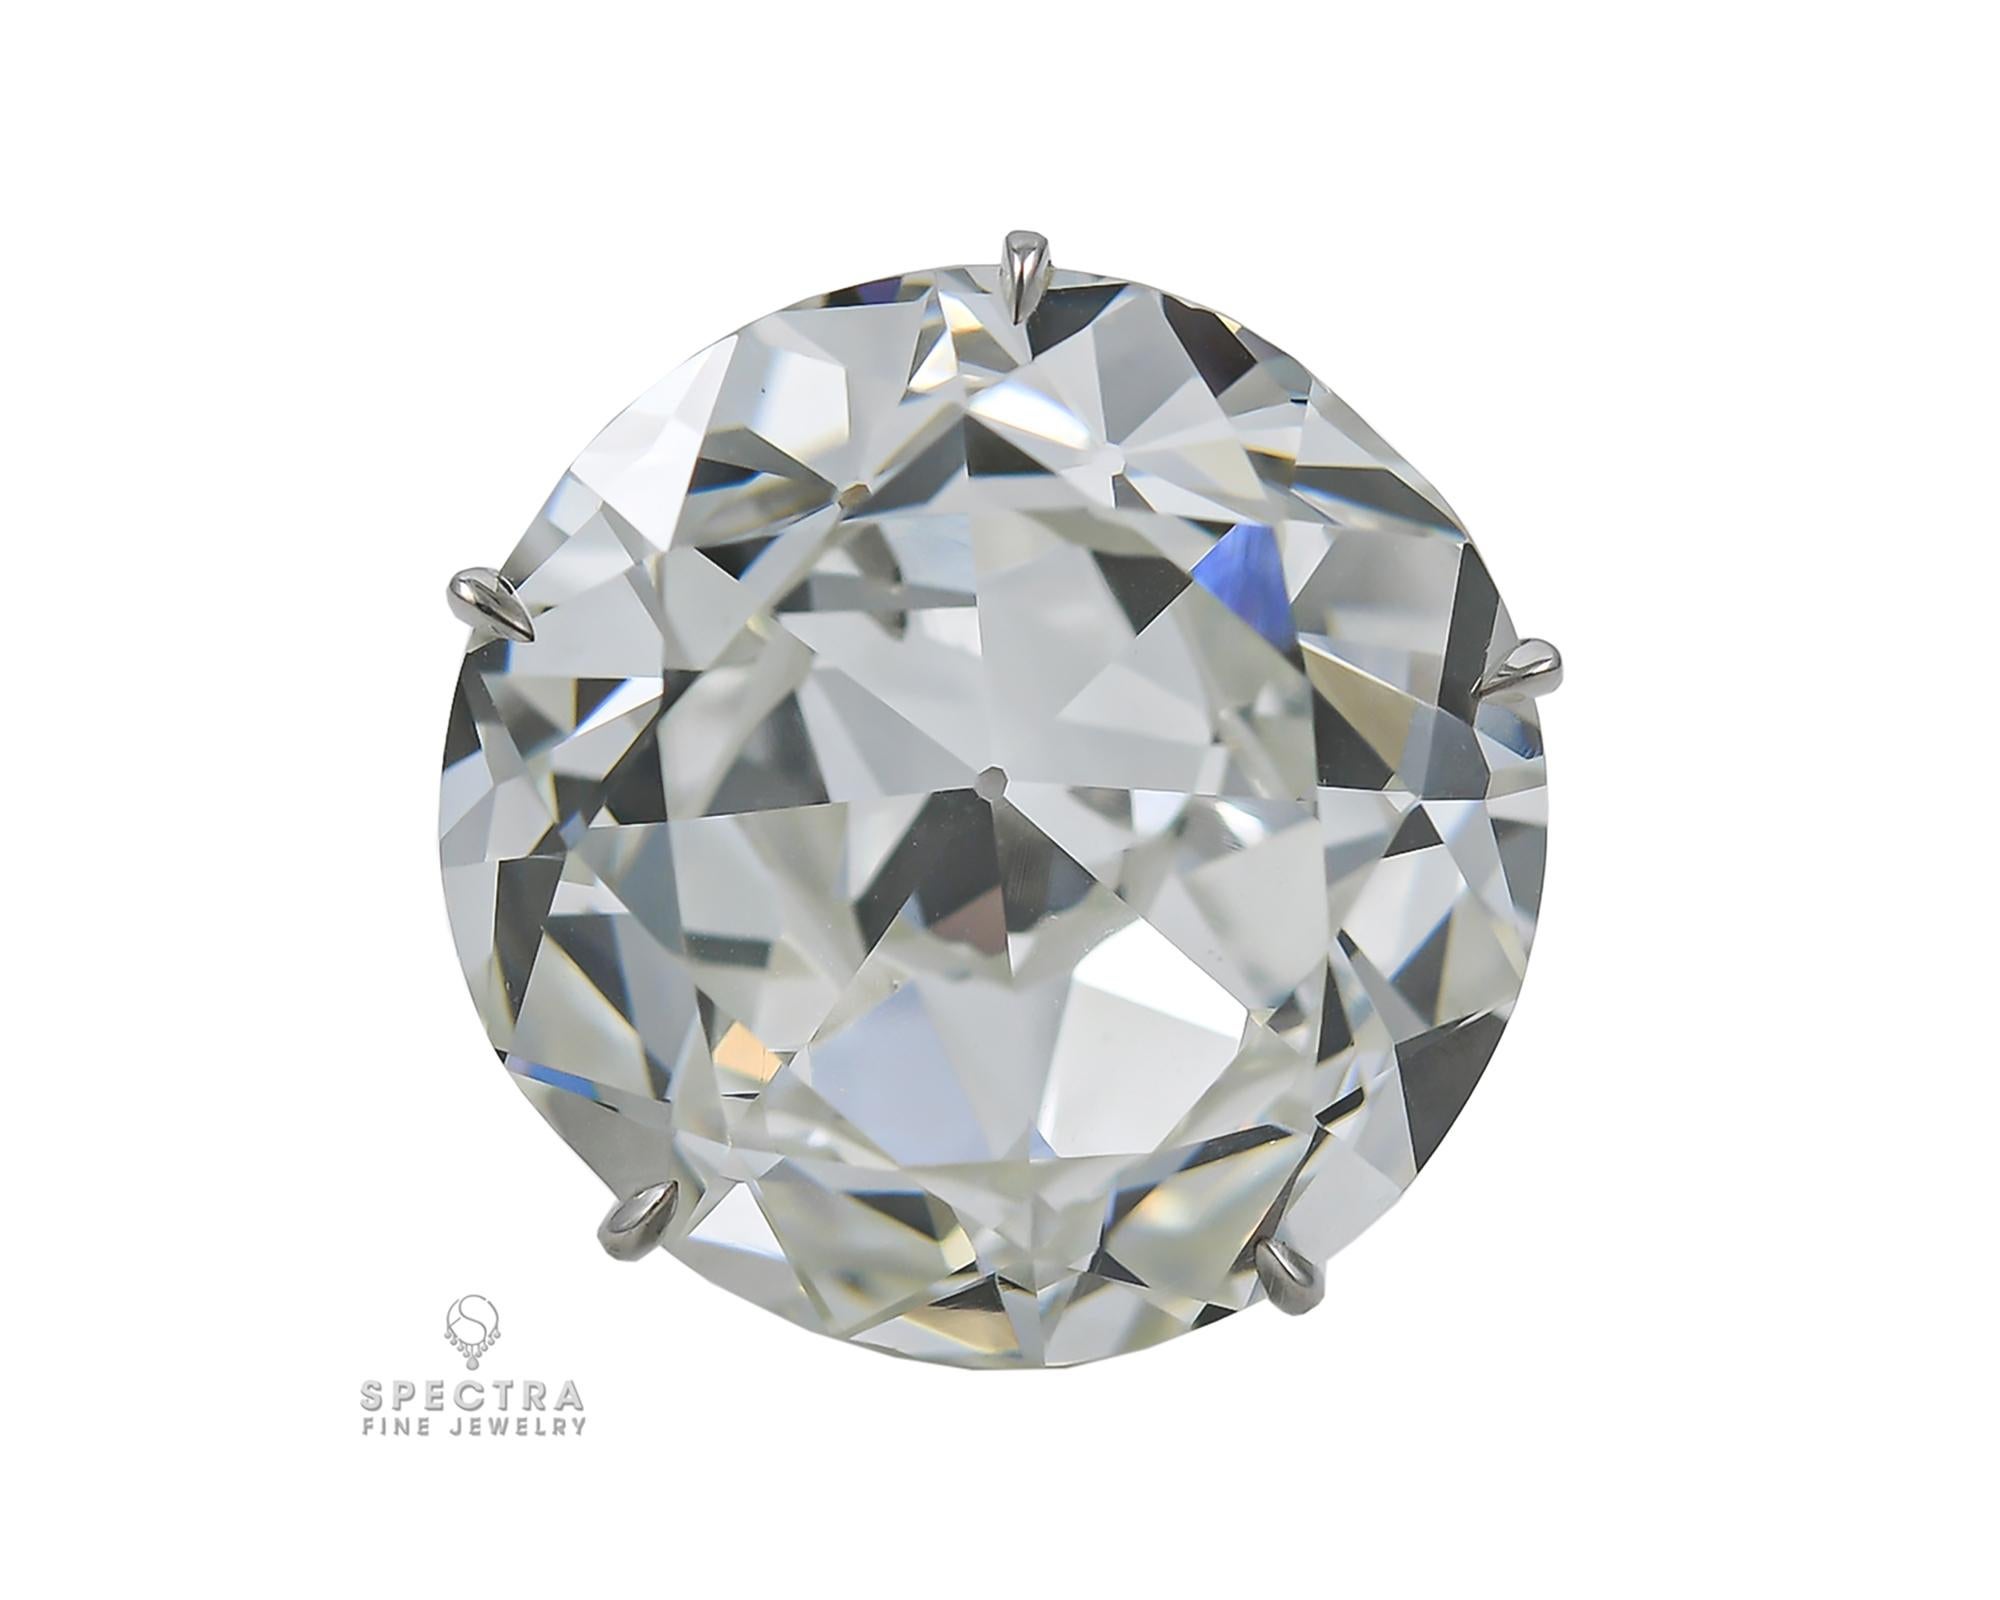 Is there anything more sustainable than a one-of-a-kind antique diamond more than 100 years old that has been repurposed into a modern setting? It is romantic to think about this particular old European cut diamond, a direct predecessor to the